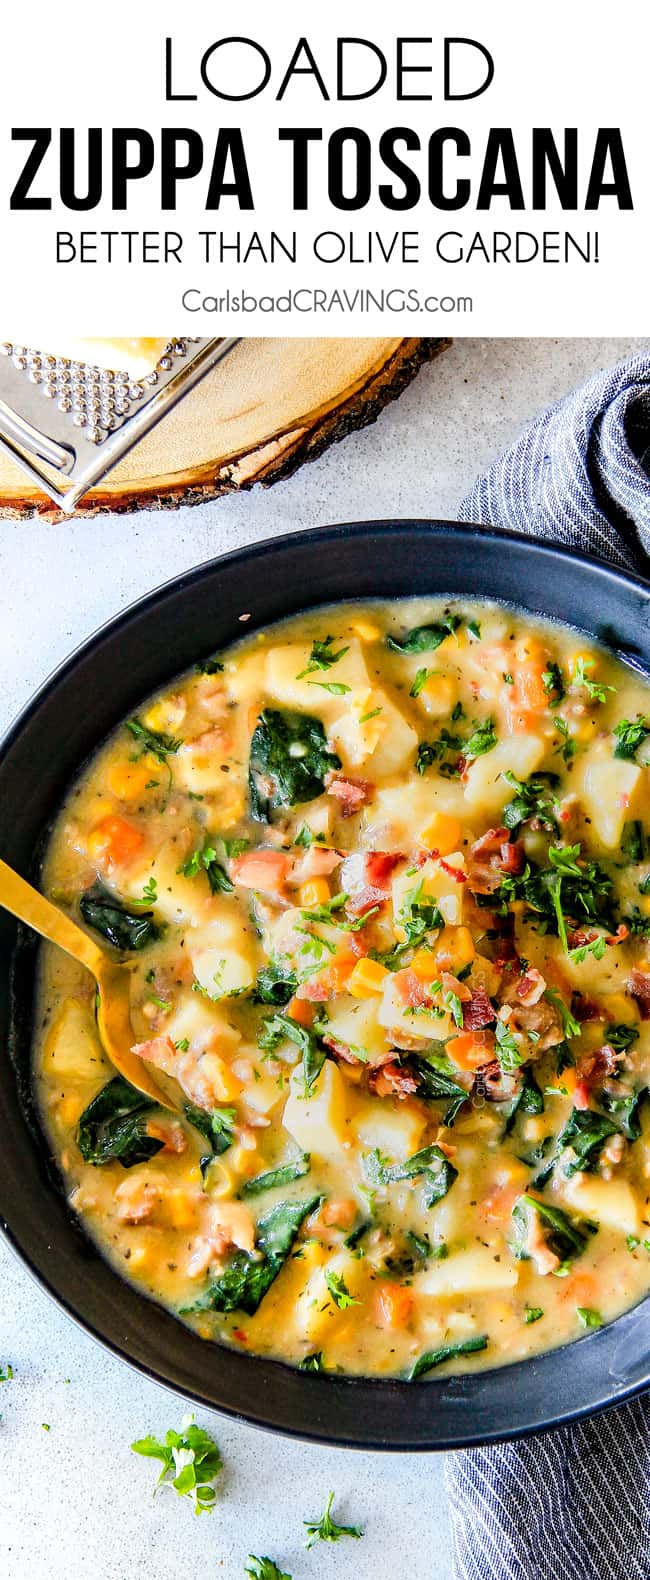 Better Than Olive Garden Loaded Zuppa Toscana Recipe Video